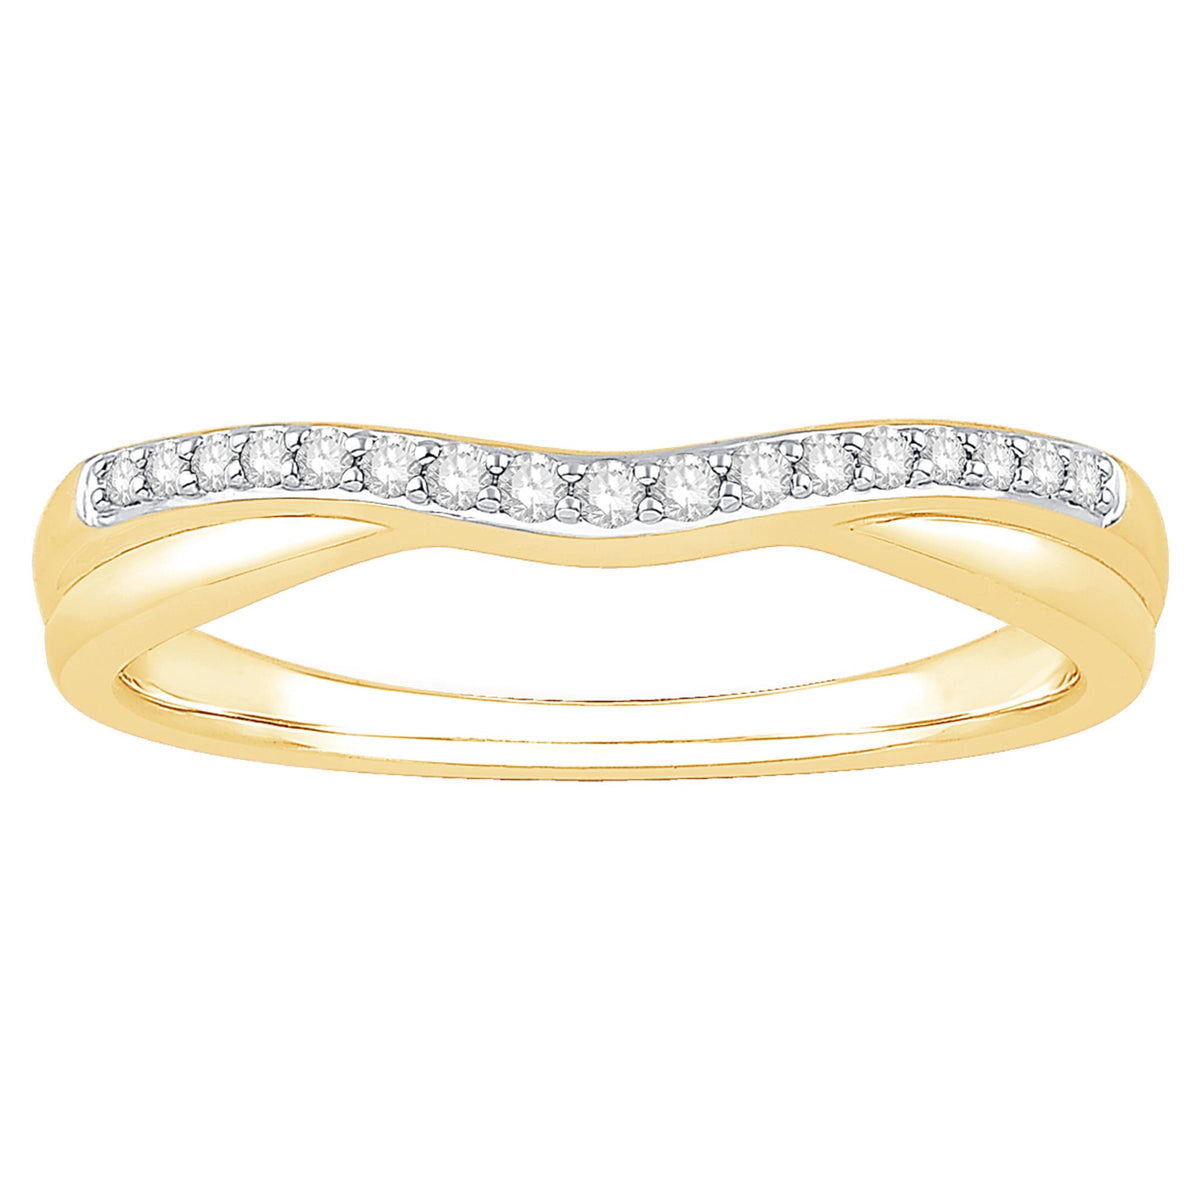 14Kt Yellow Gold Curved Wedding Ring With 0.10cttw Natural Diamonds